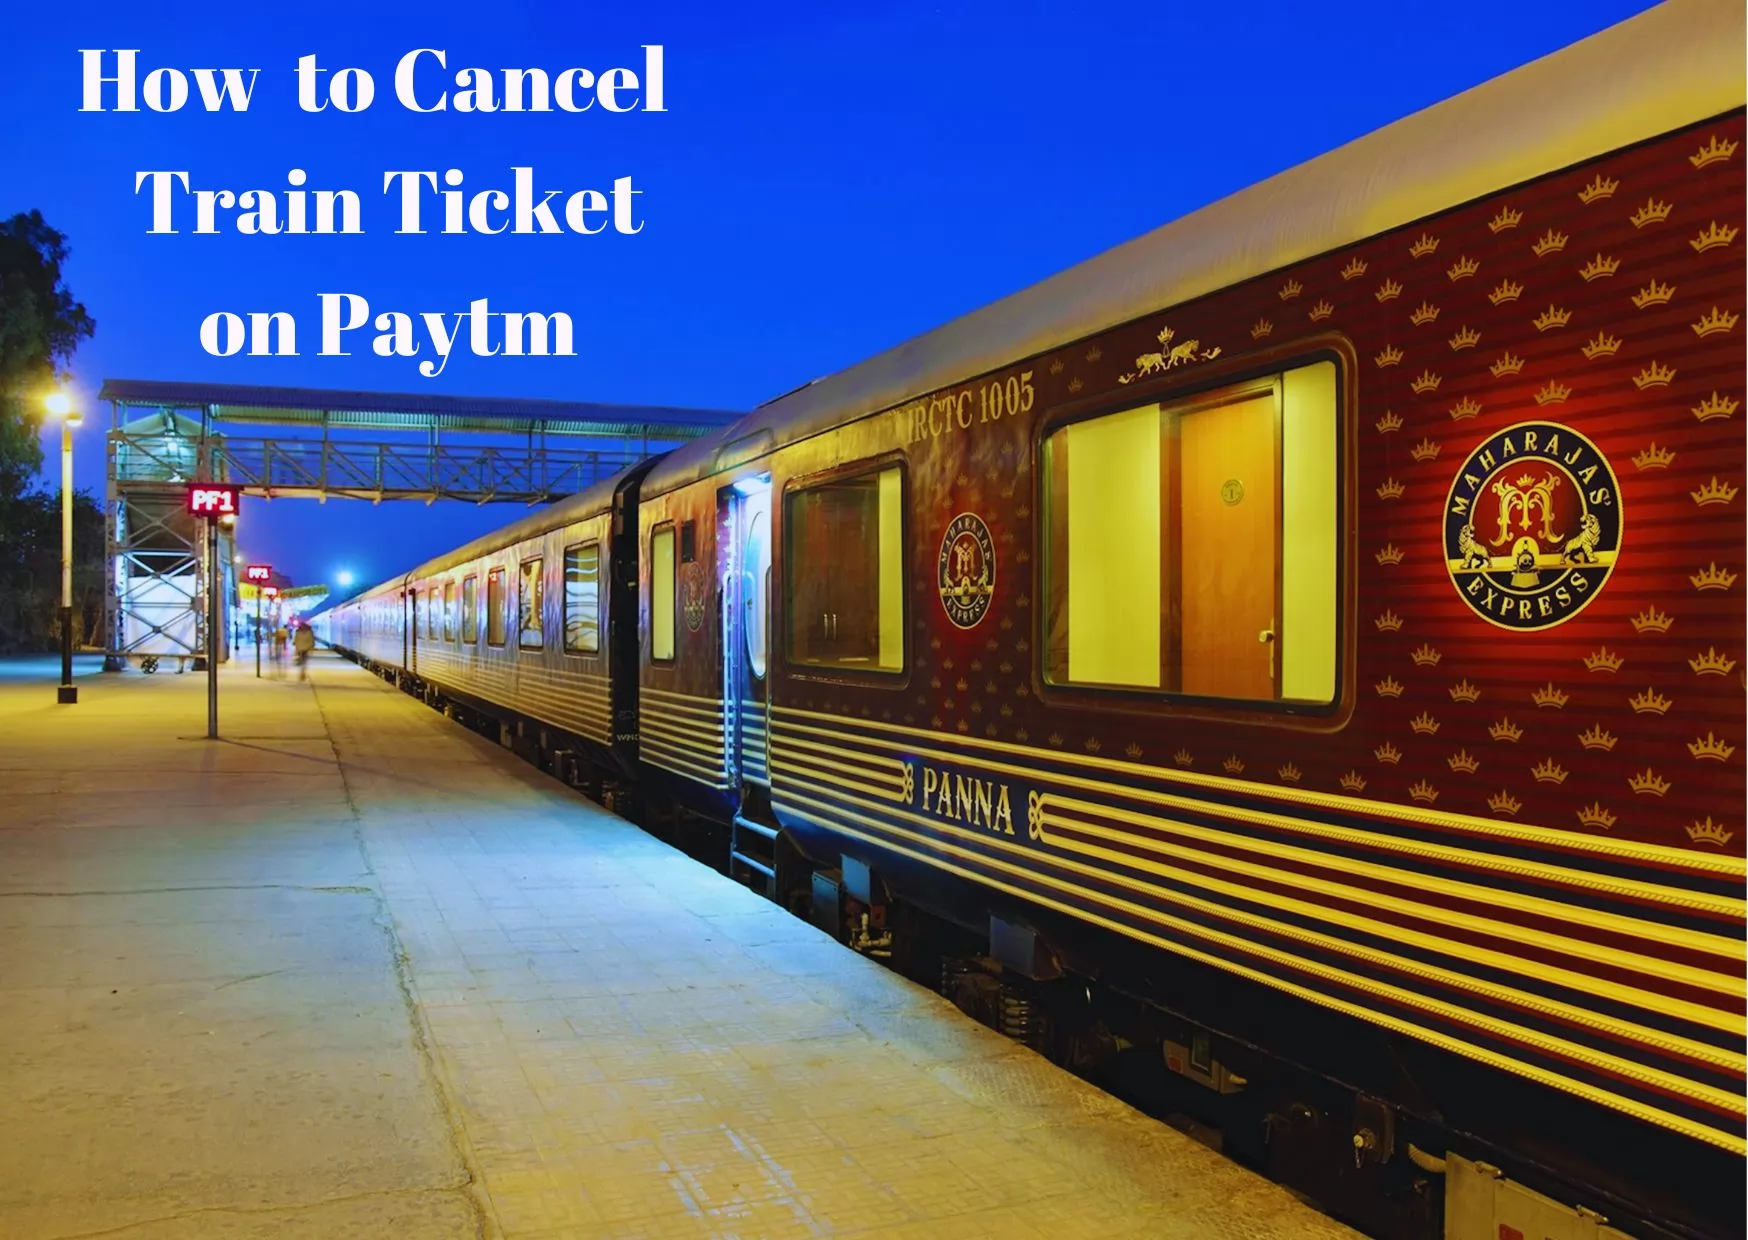 How to Cancel Train Ticket on Paytm